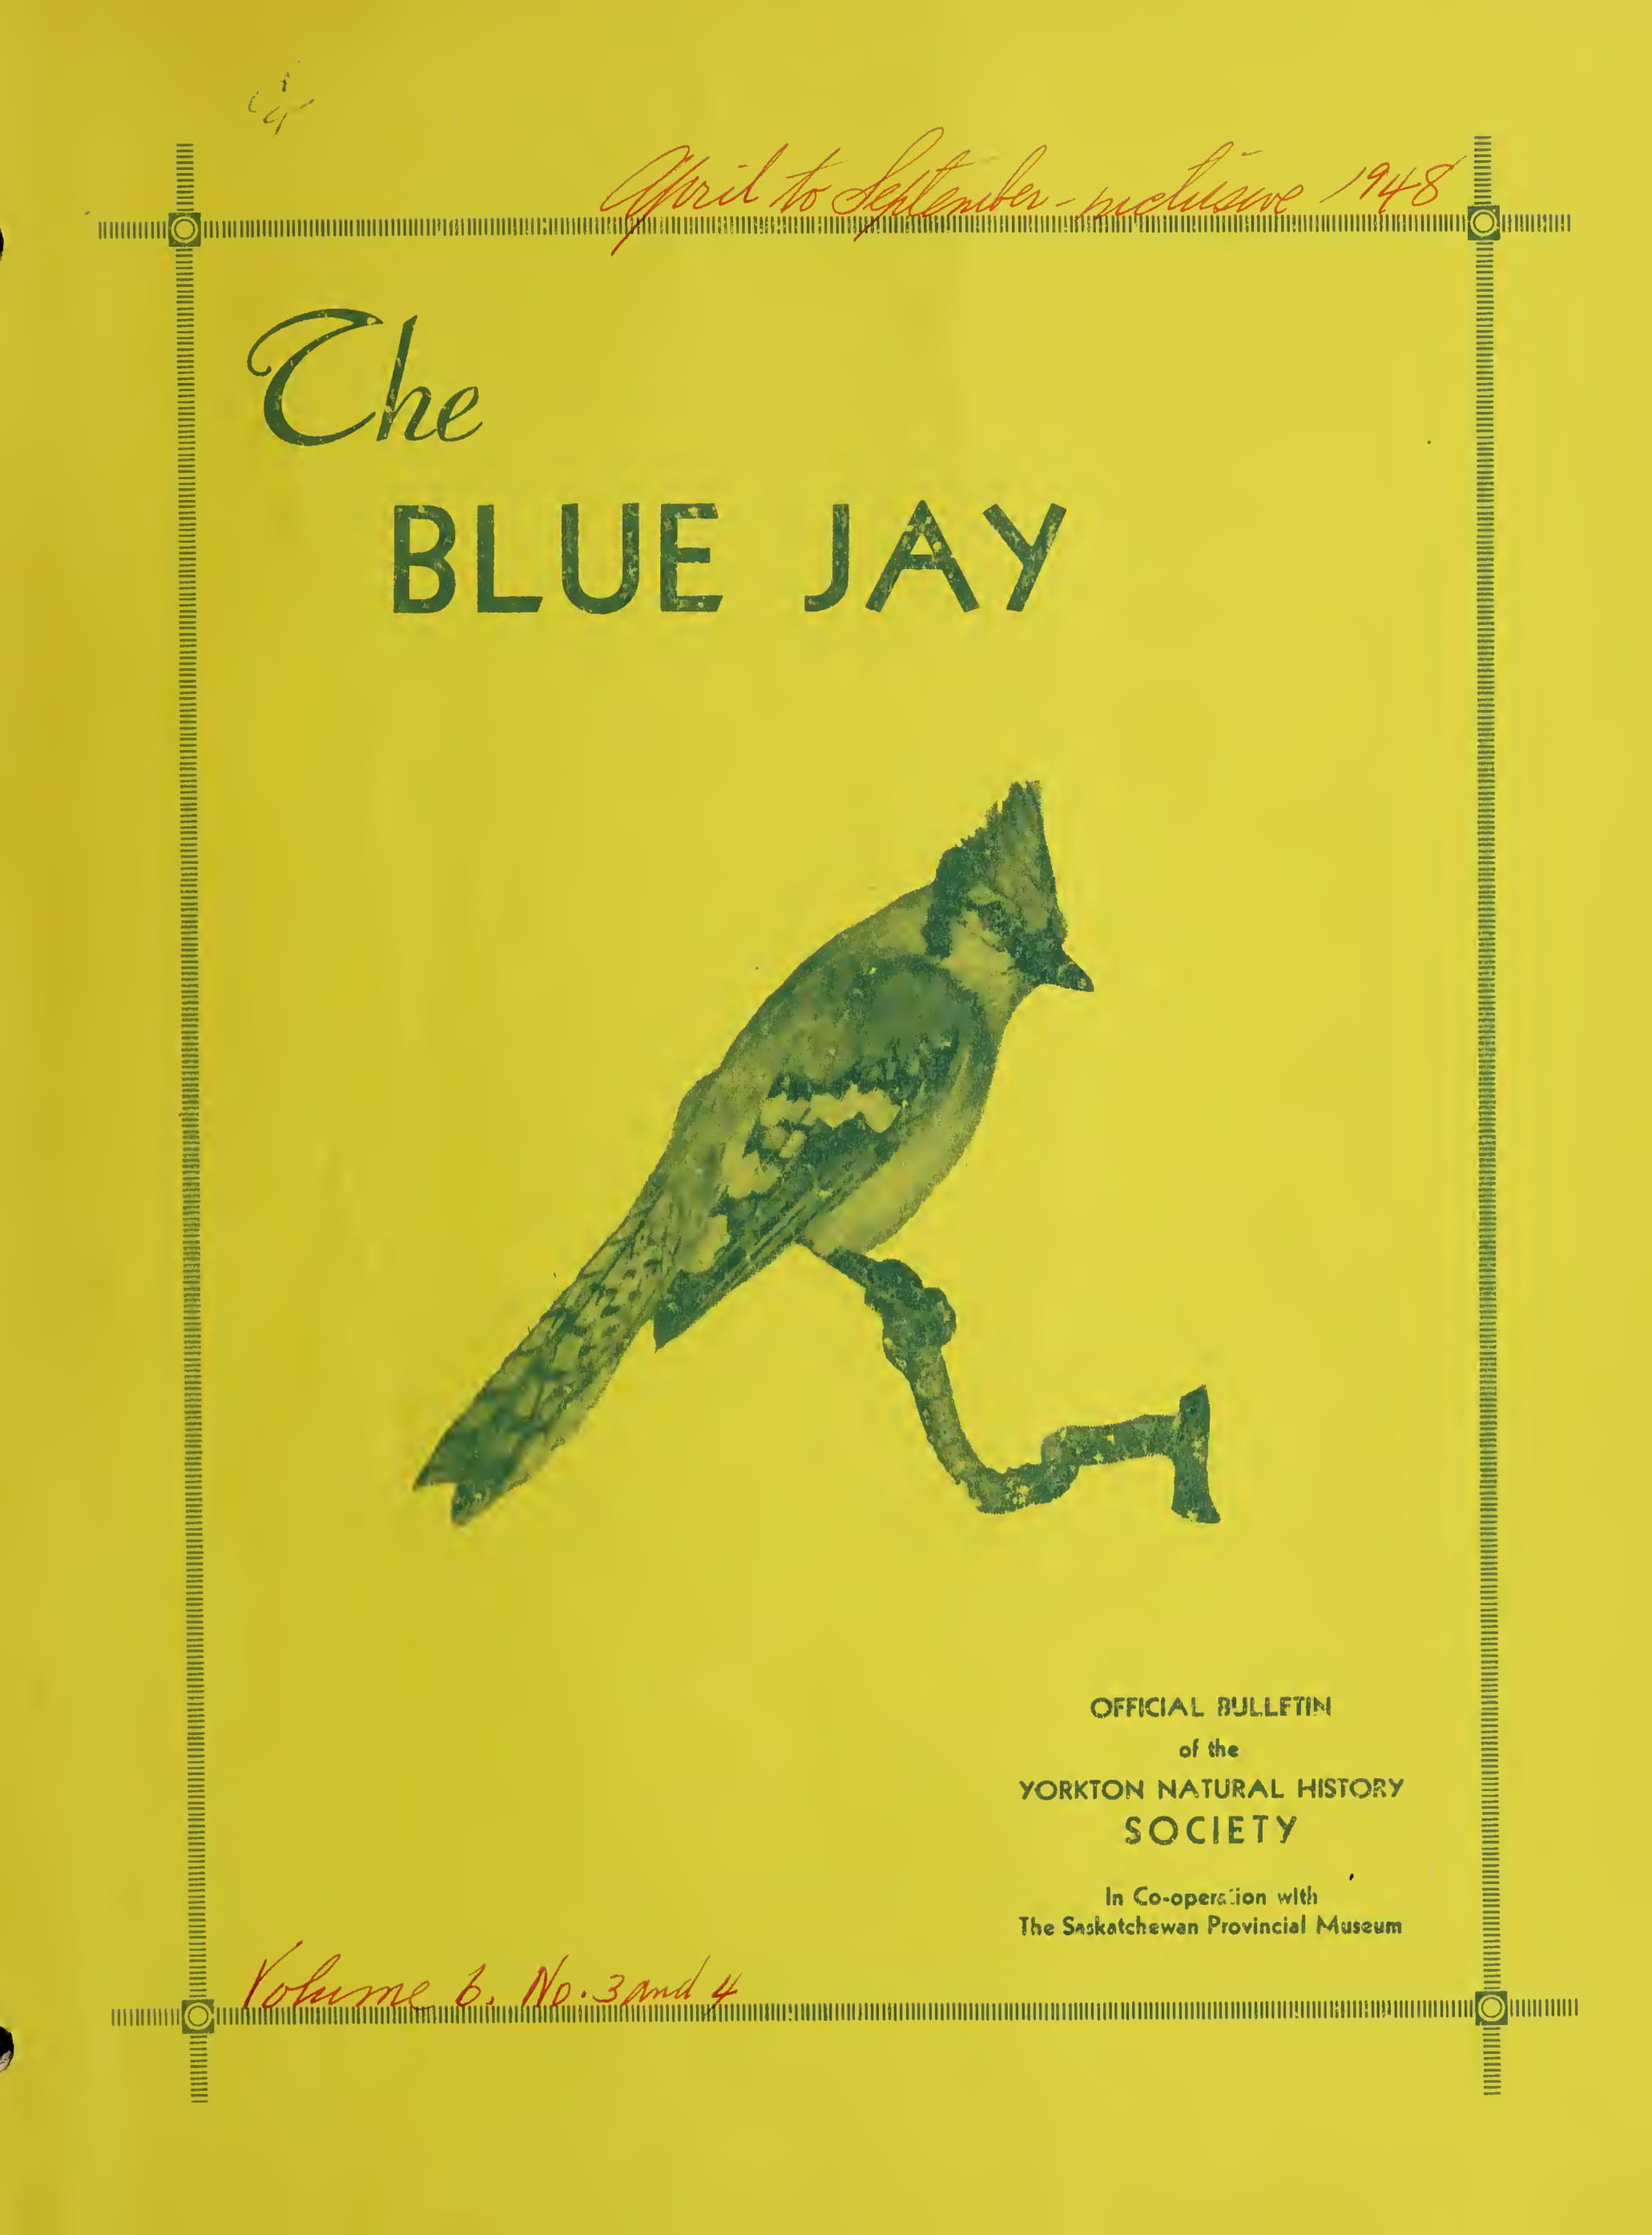 Cover Image for Spring/Summer 1948